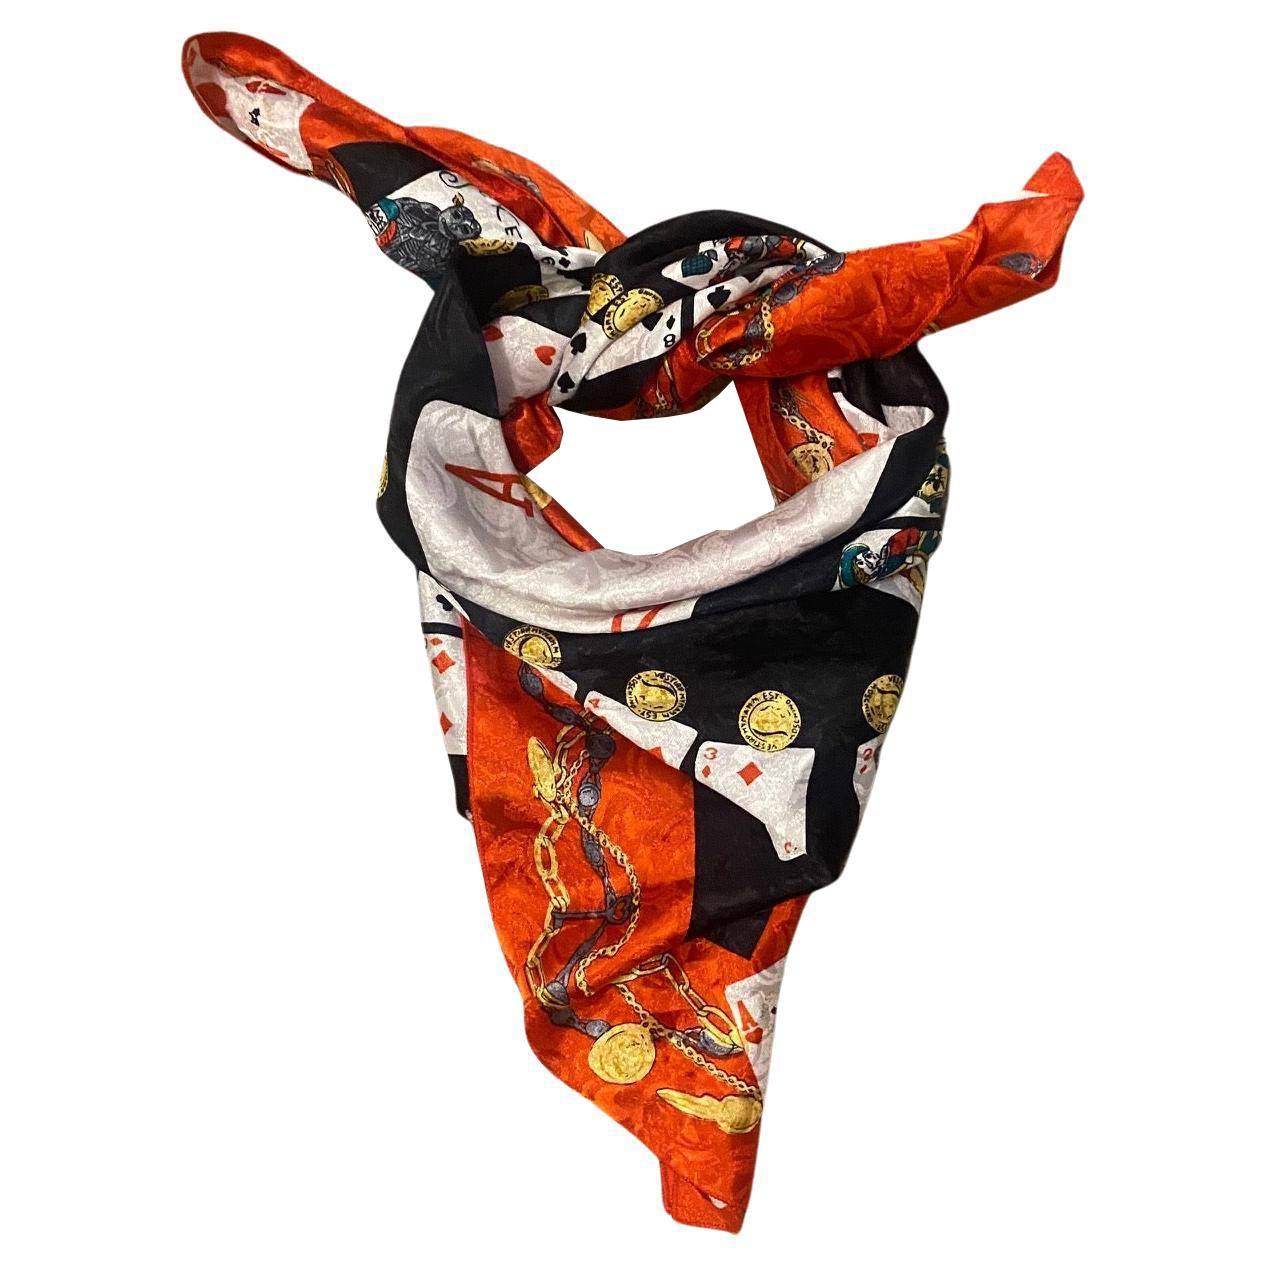 1990s Moschino Playing Cards Print scarf on main red color This lightweight, stylish scarf adds a fun pop of color to any outfit, and is sure to turn heads in any crowd.

Dimensions: 85cm x 85cm

Condition: vintage, 1990s, very good

This timeless